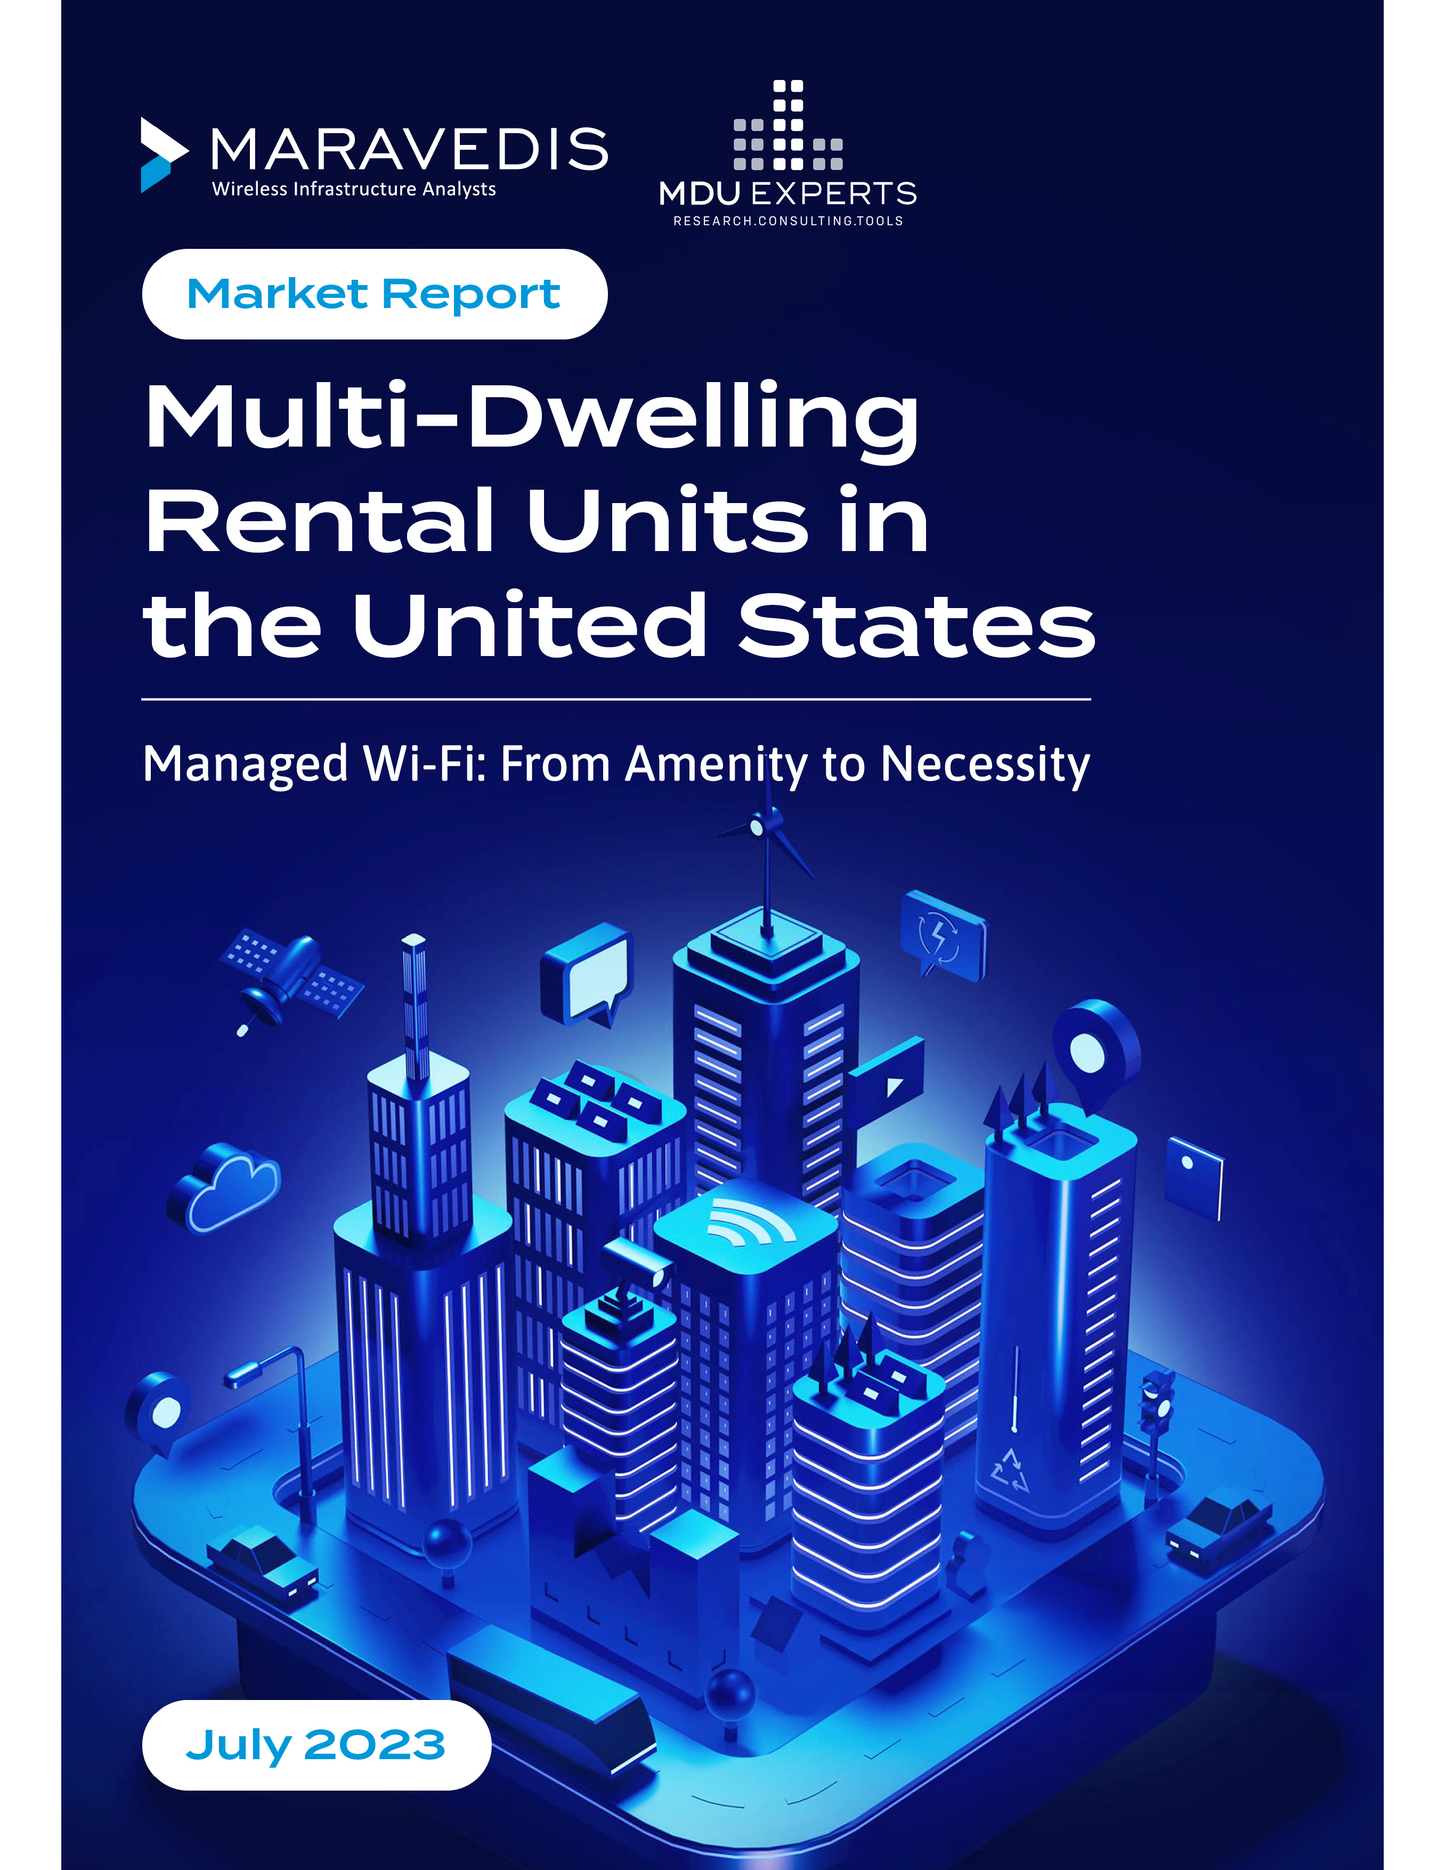 Multi-Dwelling Rental Units in the United States – Managed Wi-Fi: From Amenity to Necessity